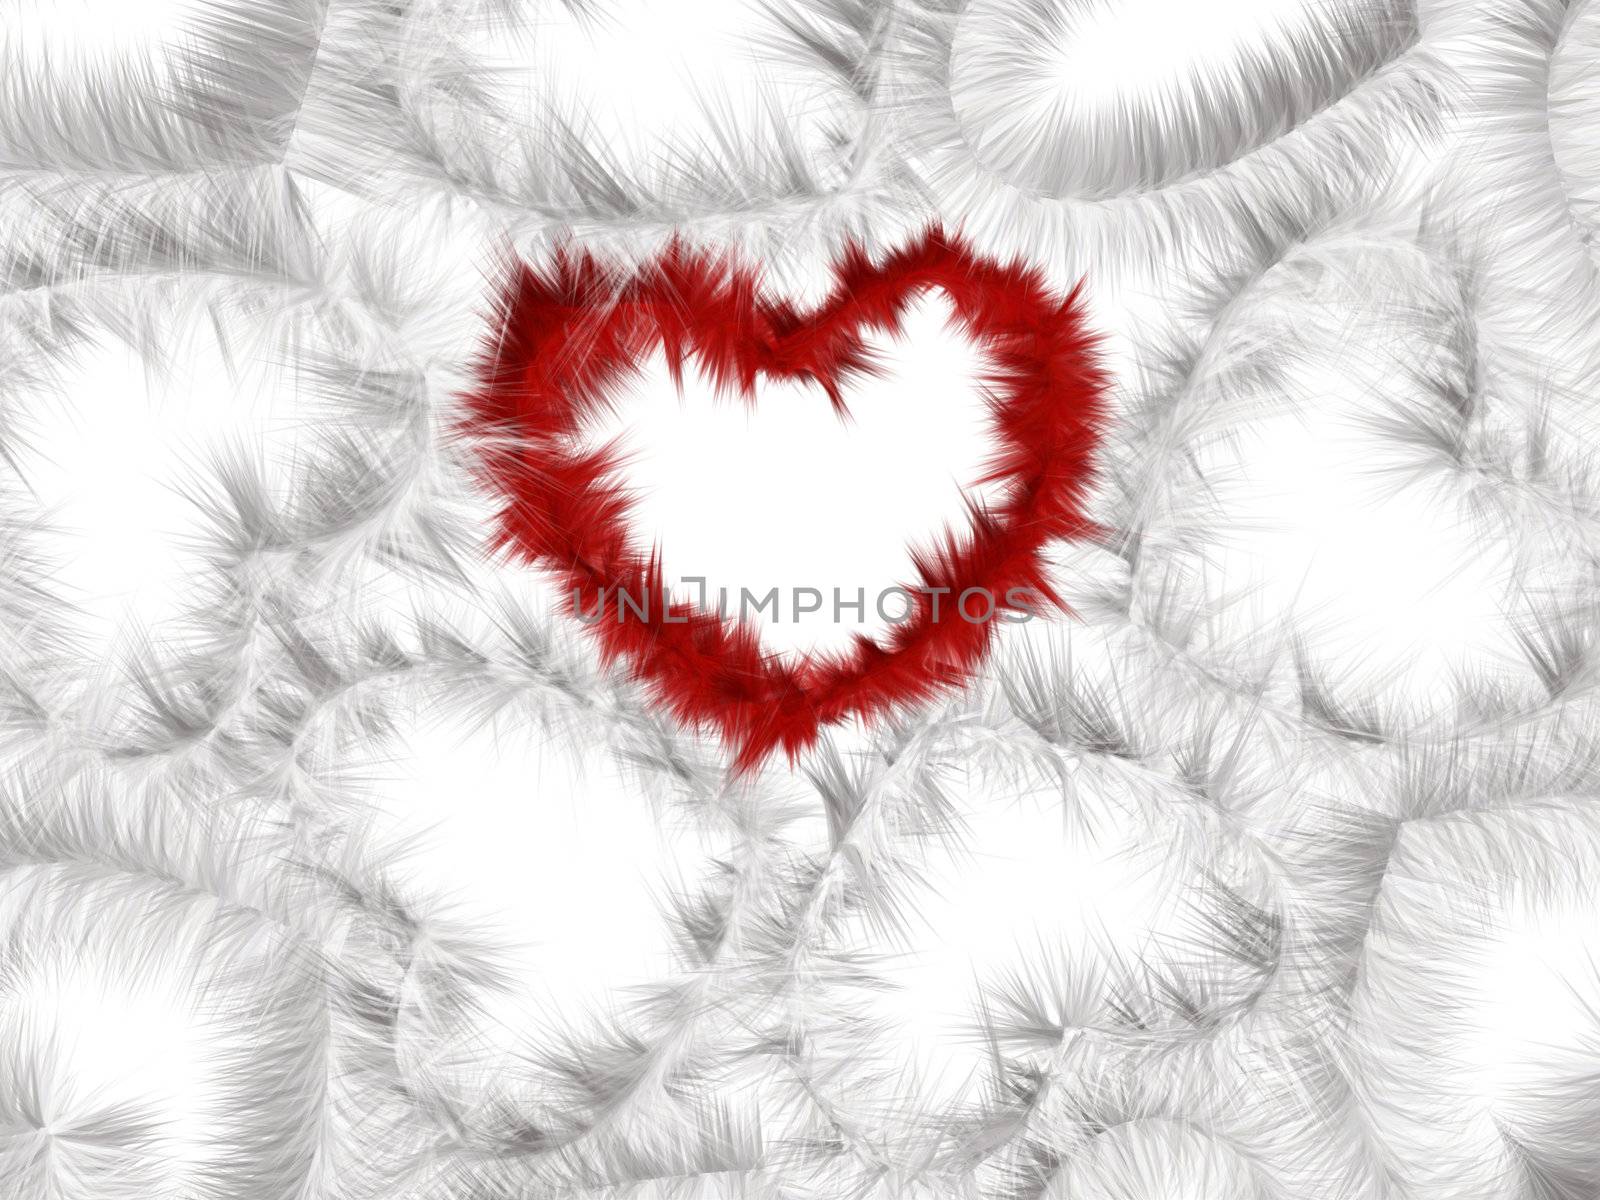 Red and white hearts by magraphics